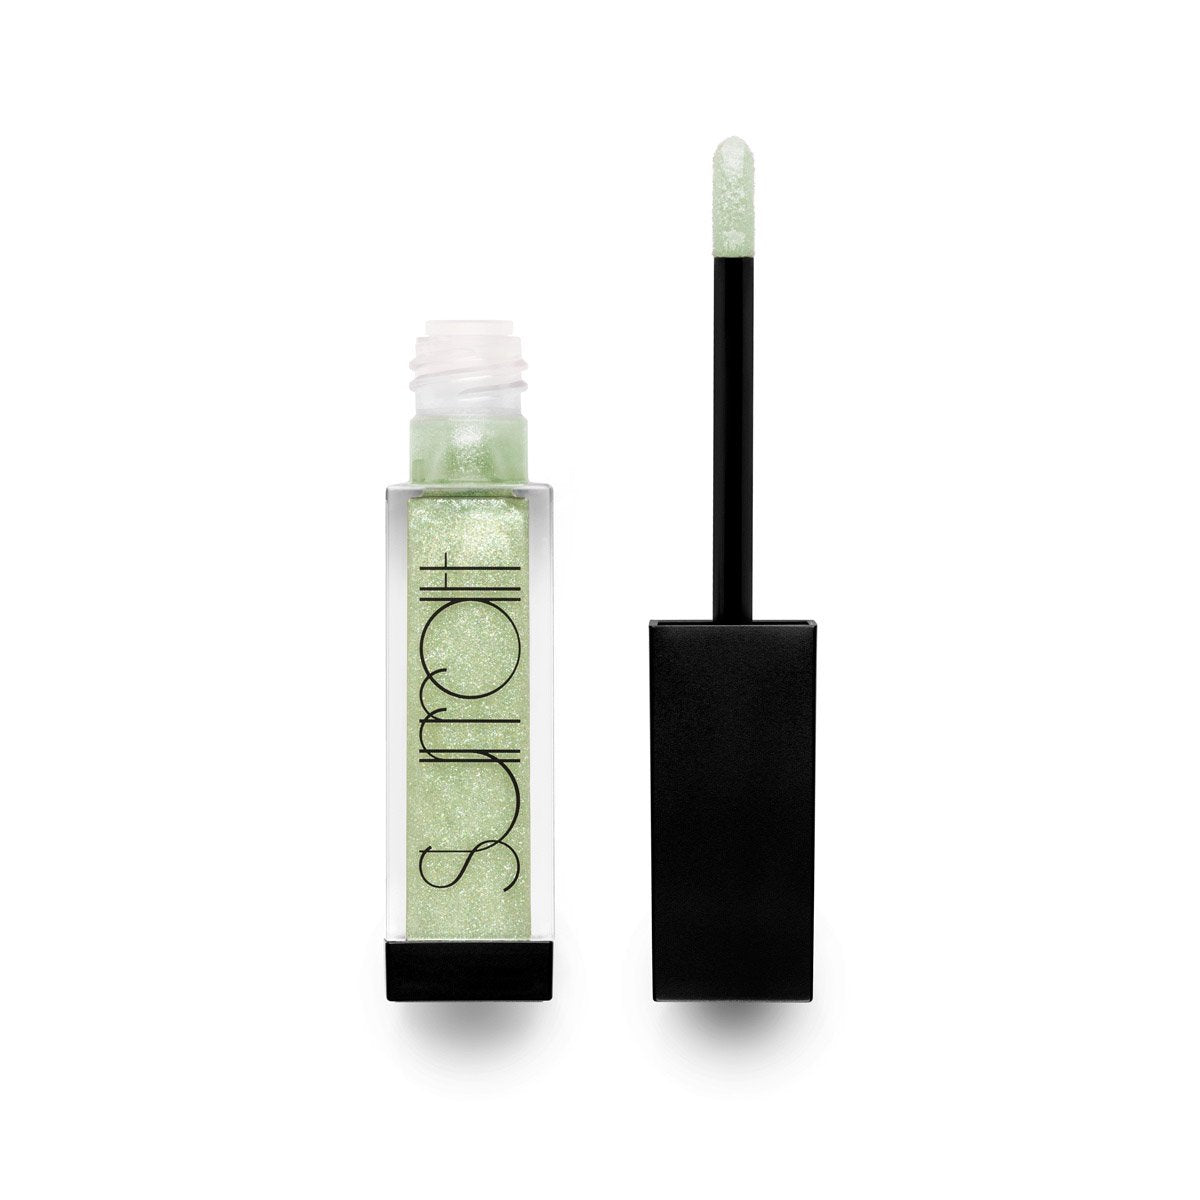 FAUX PAS - IRIDESCENT PALE GREEN WITH GOLD SHIMMER - color shifting pink lip gloss with glitter